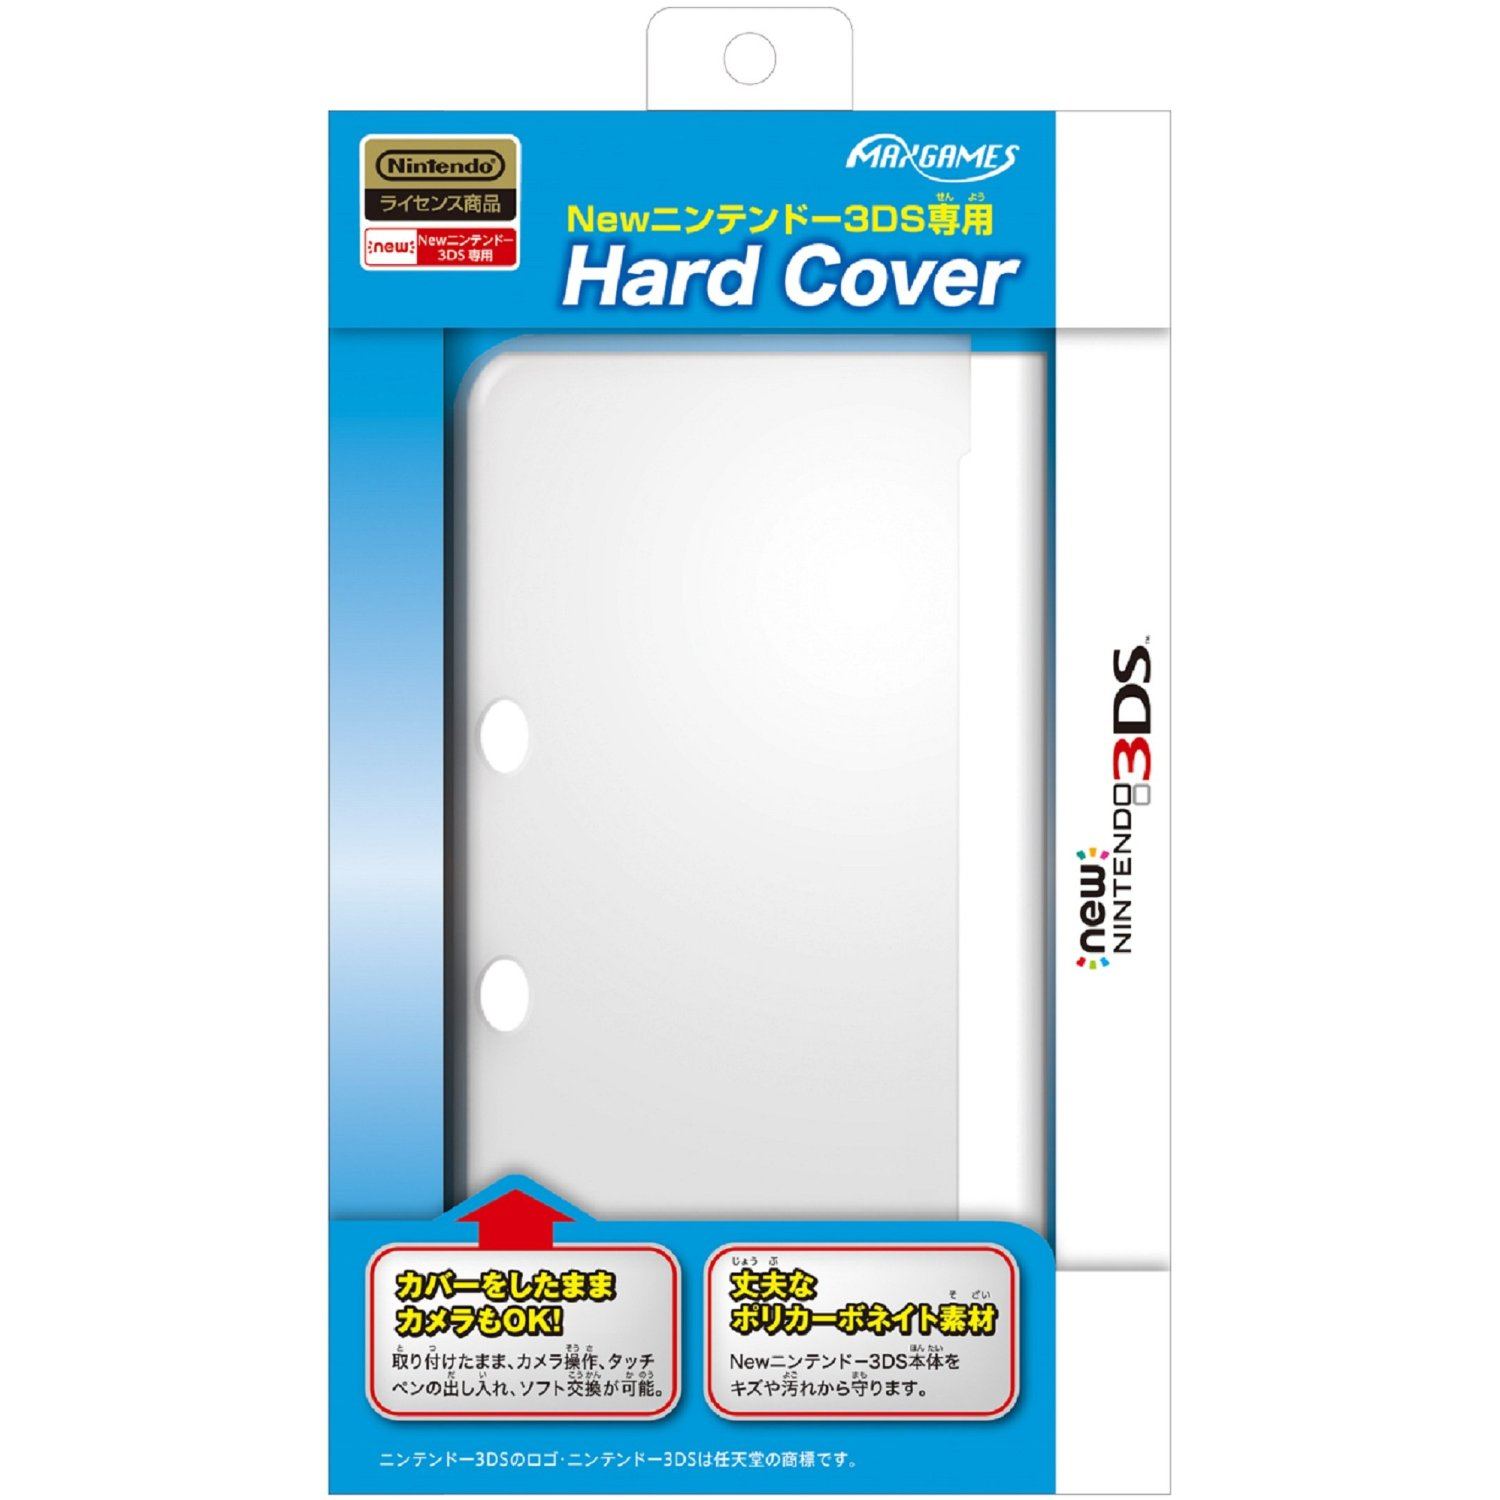 Hard Cover for New 3DS (Clear) for New Nintendo 3DS